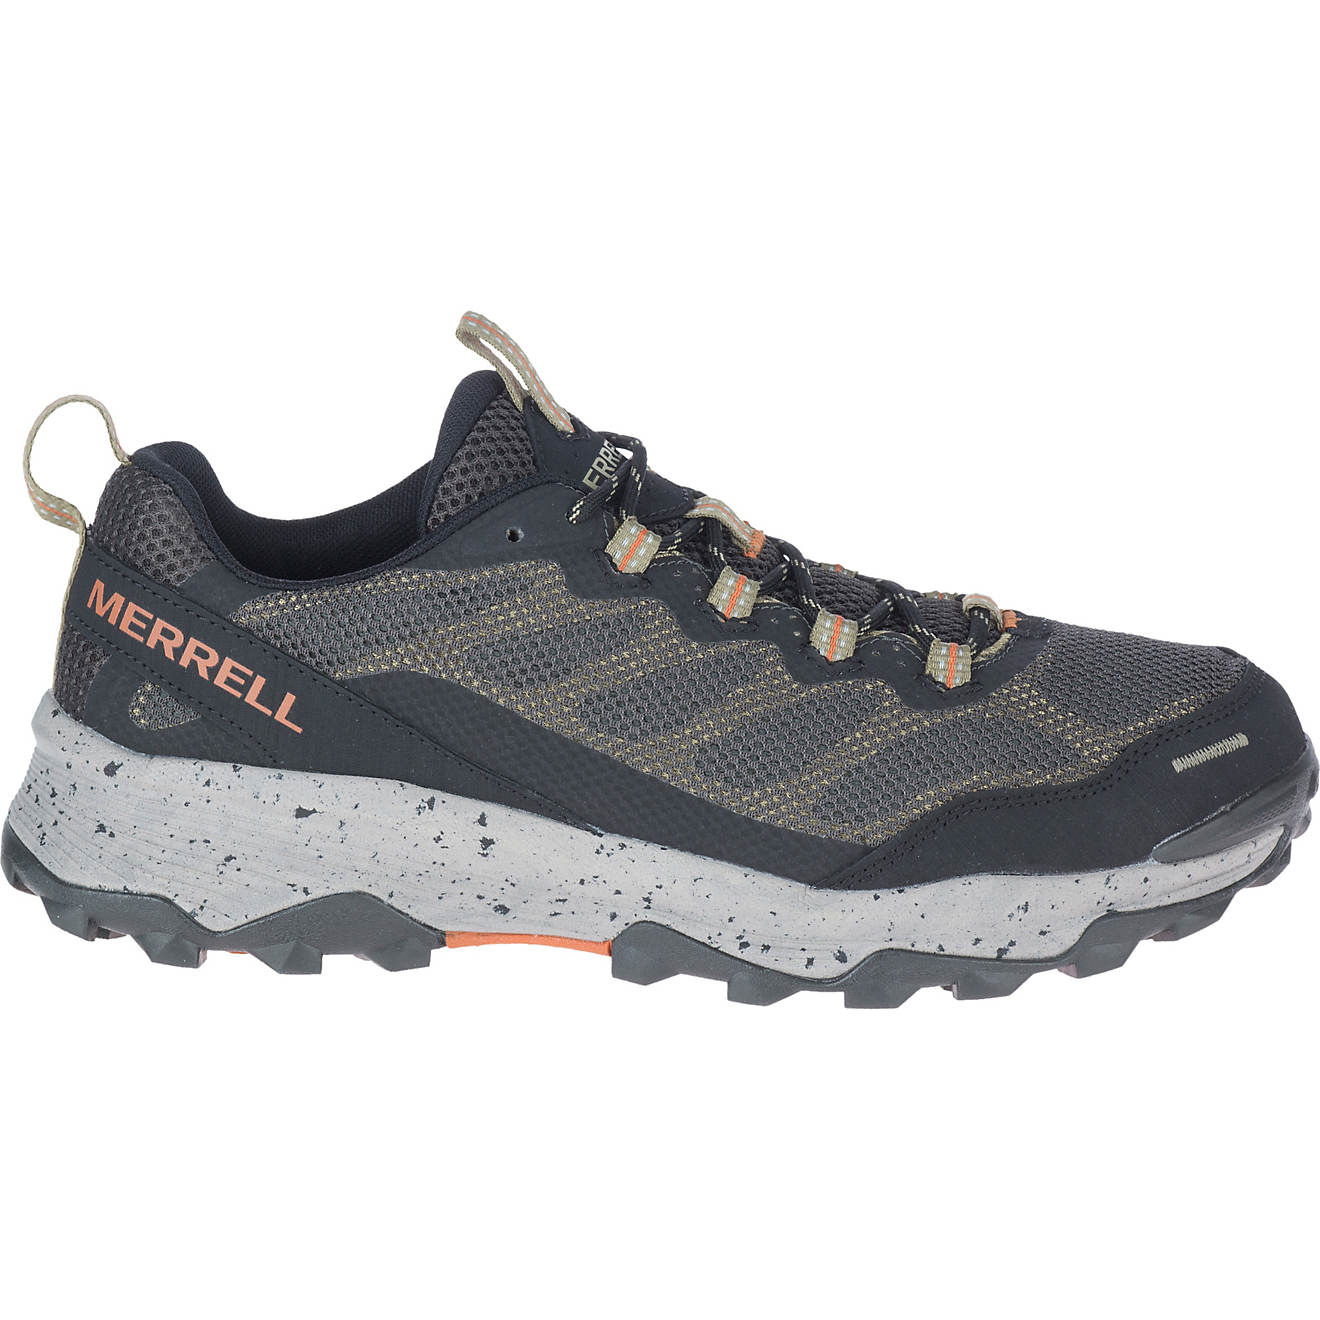 Does Academy Sell Merrell Shoes?